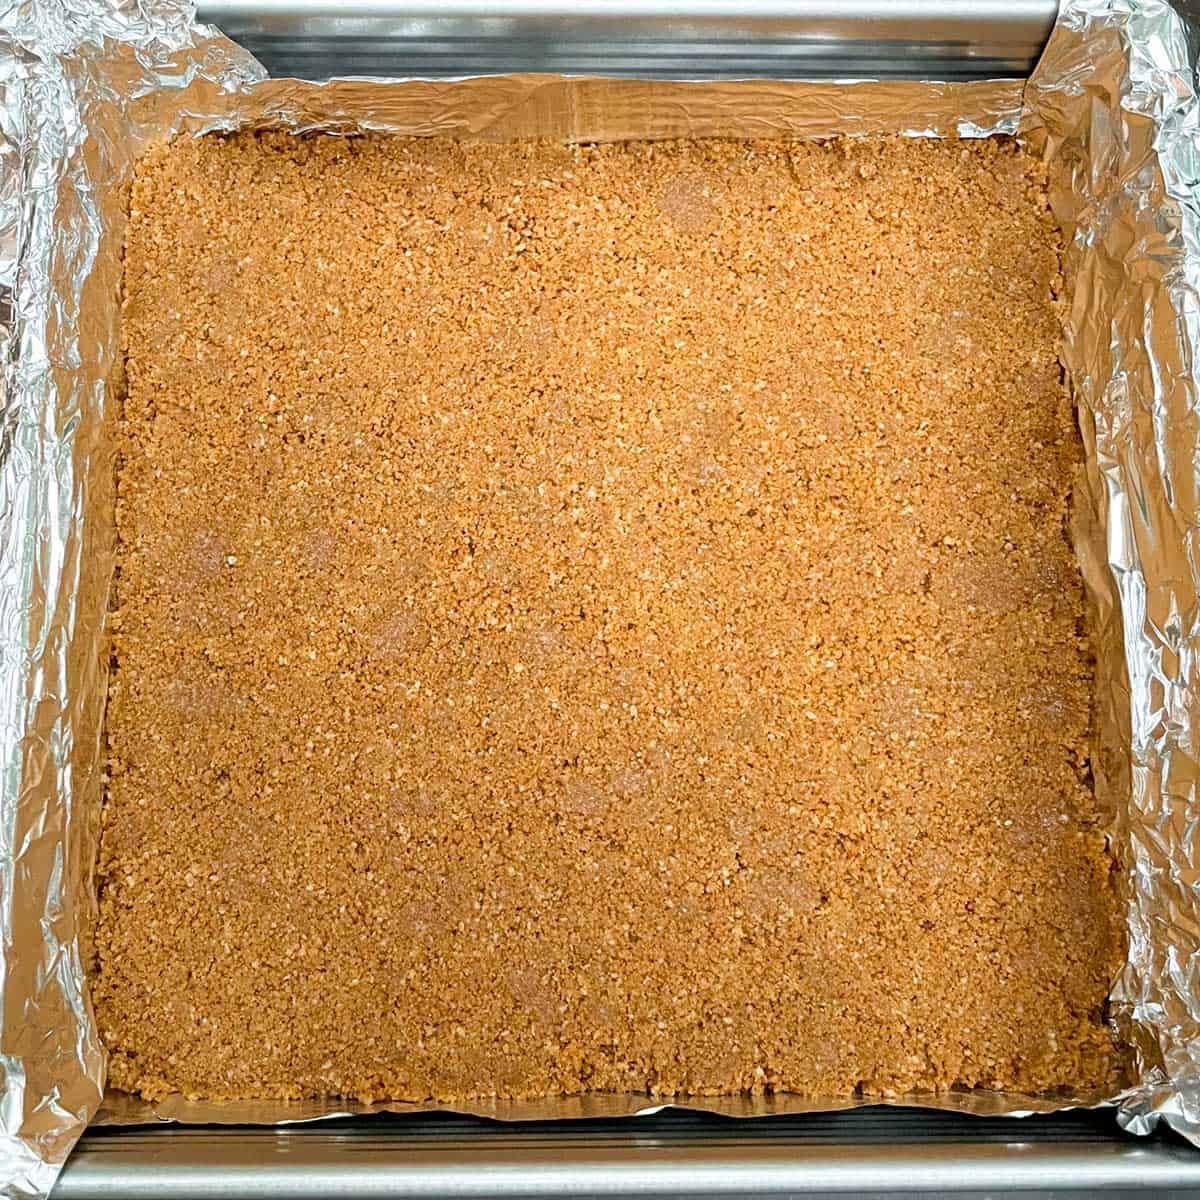 Pressed graham cracker crust ready for the cream cheesecake filling.